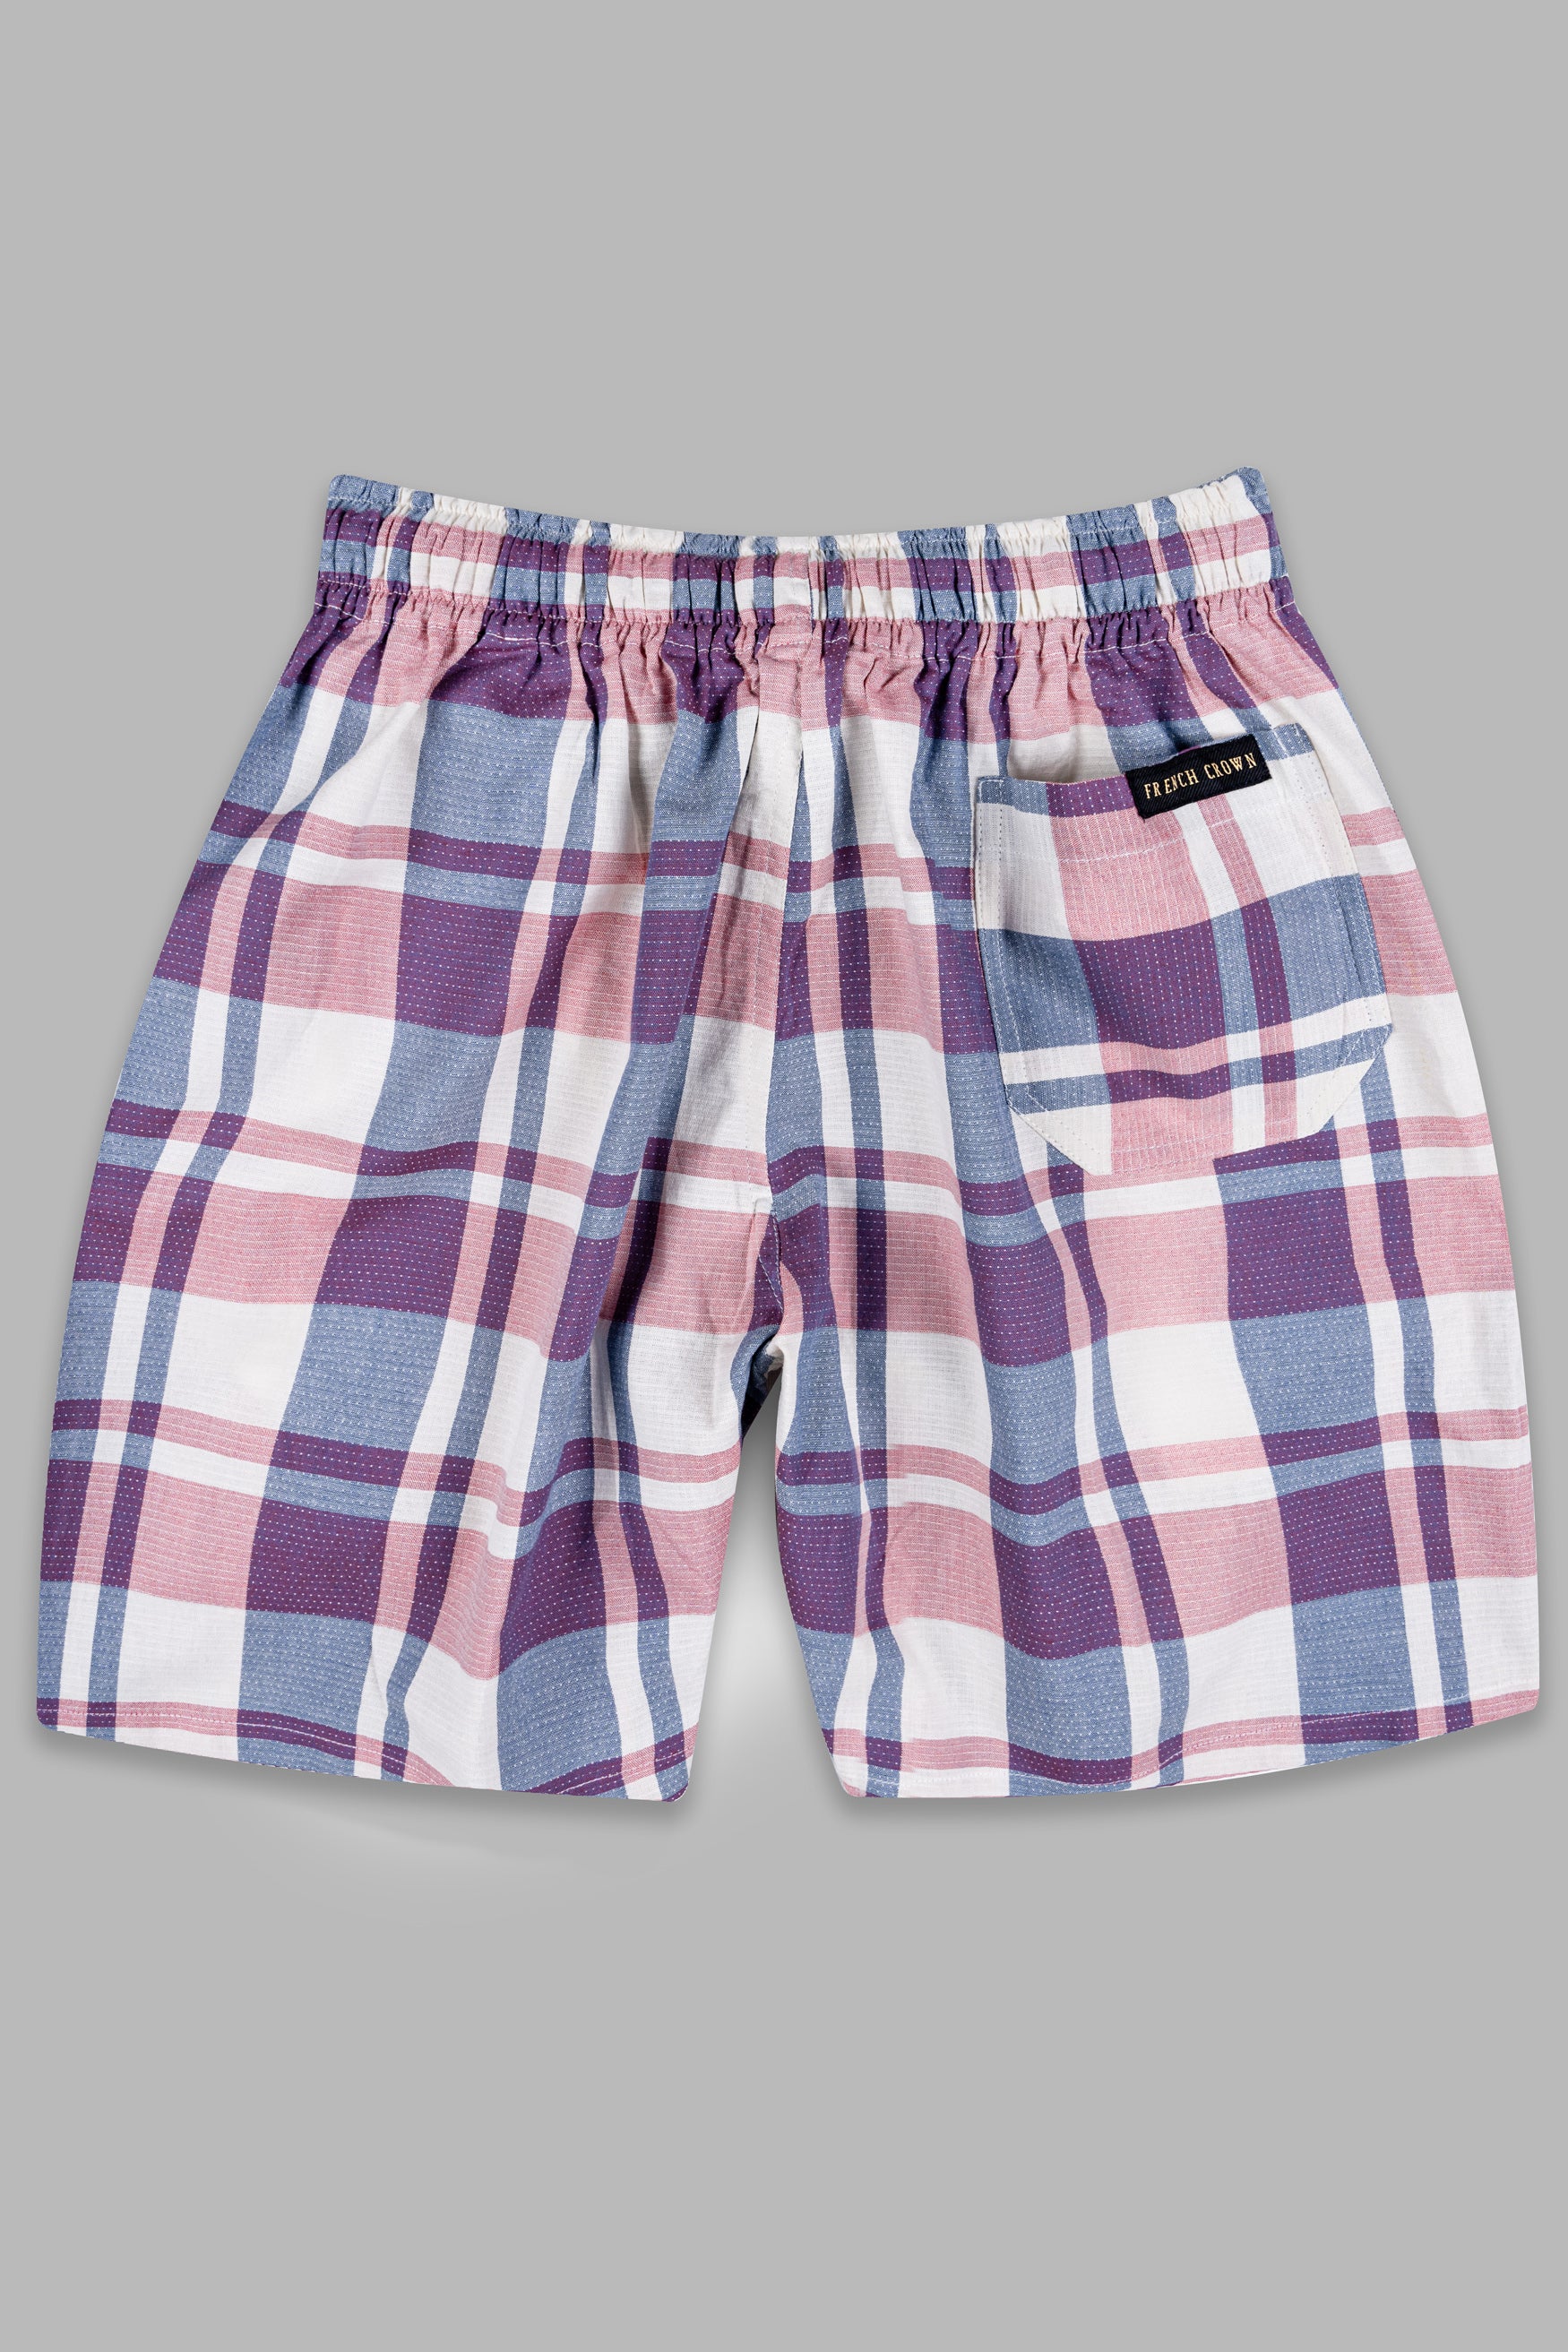 Bright White with Cavern Pink and Mulled Wine Purple Checkered Dobby Textured Giza Cotton Shorts SR396-28, SR396-30, SR396-32, SR396-34, SR396-36, SR396-38, SR396-40, SR396-42, SR396-44